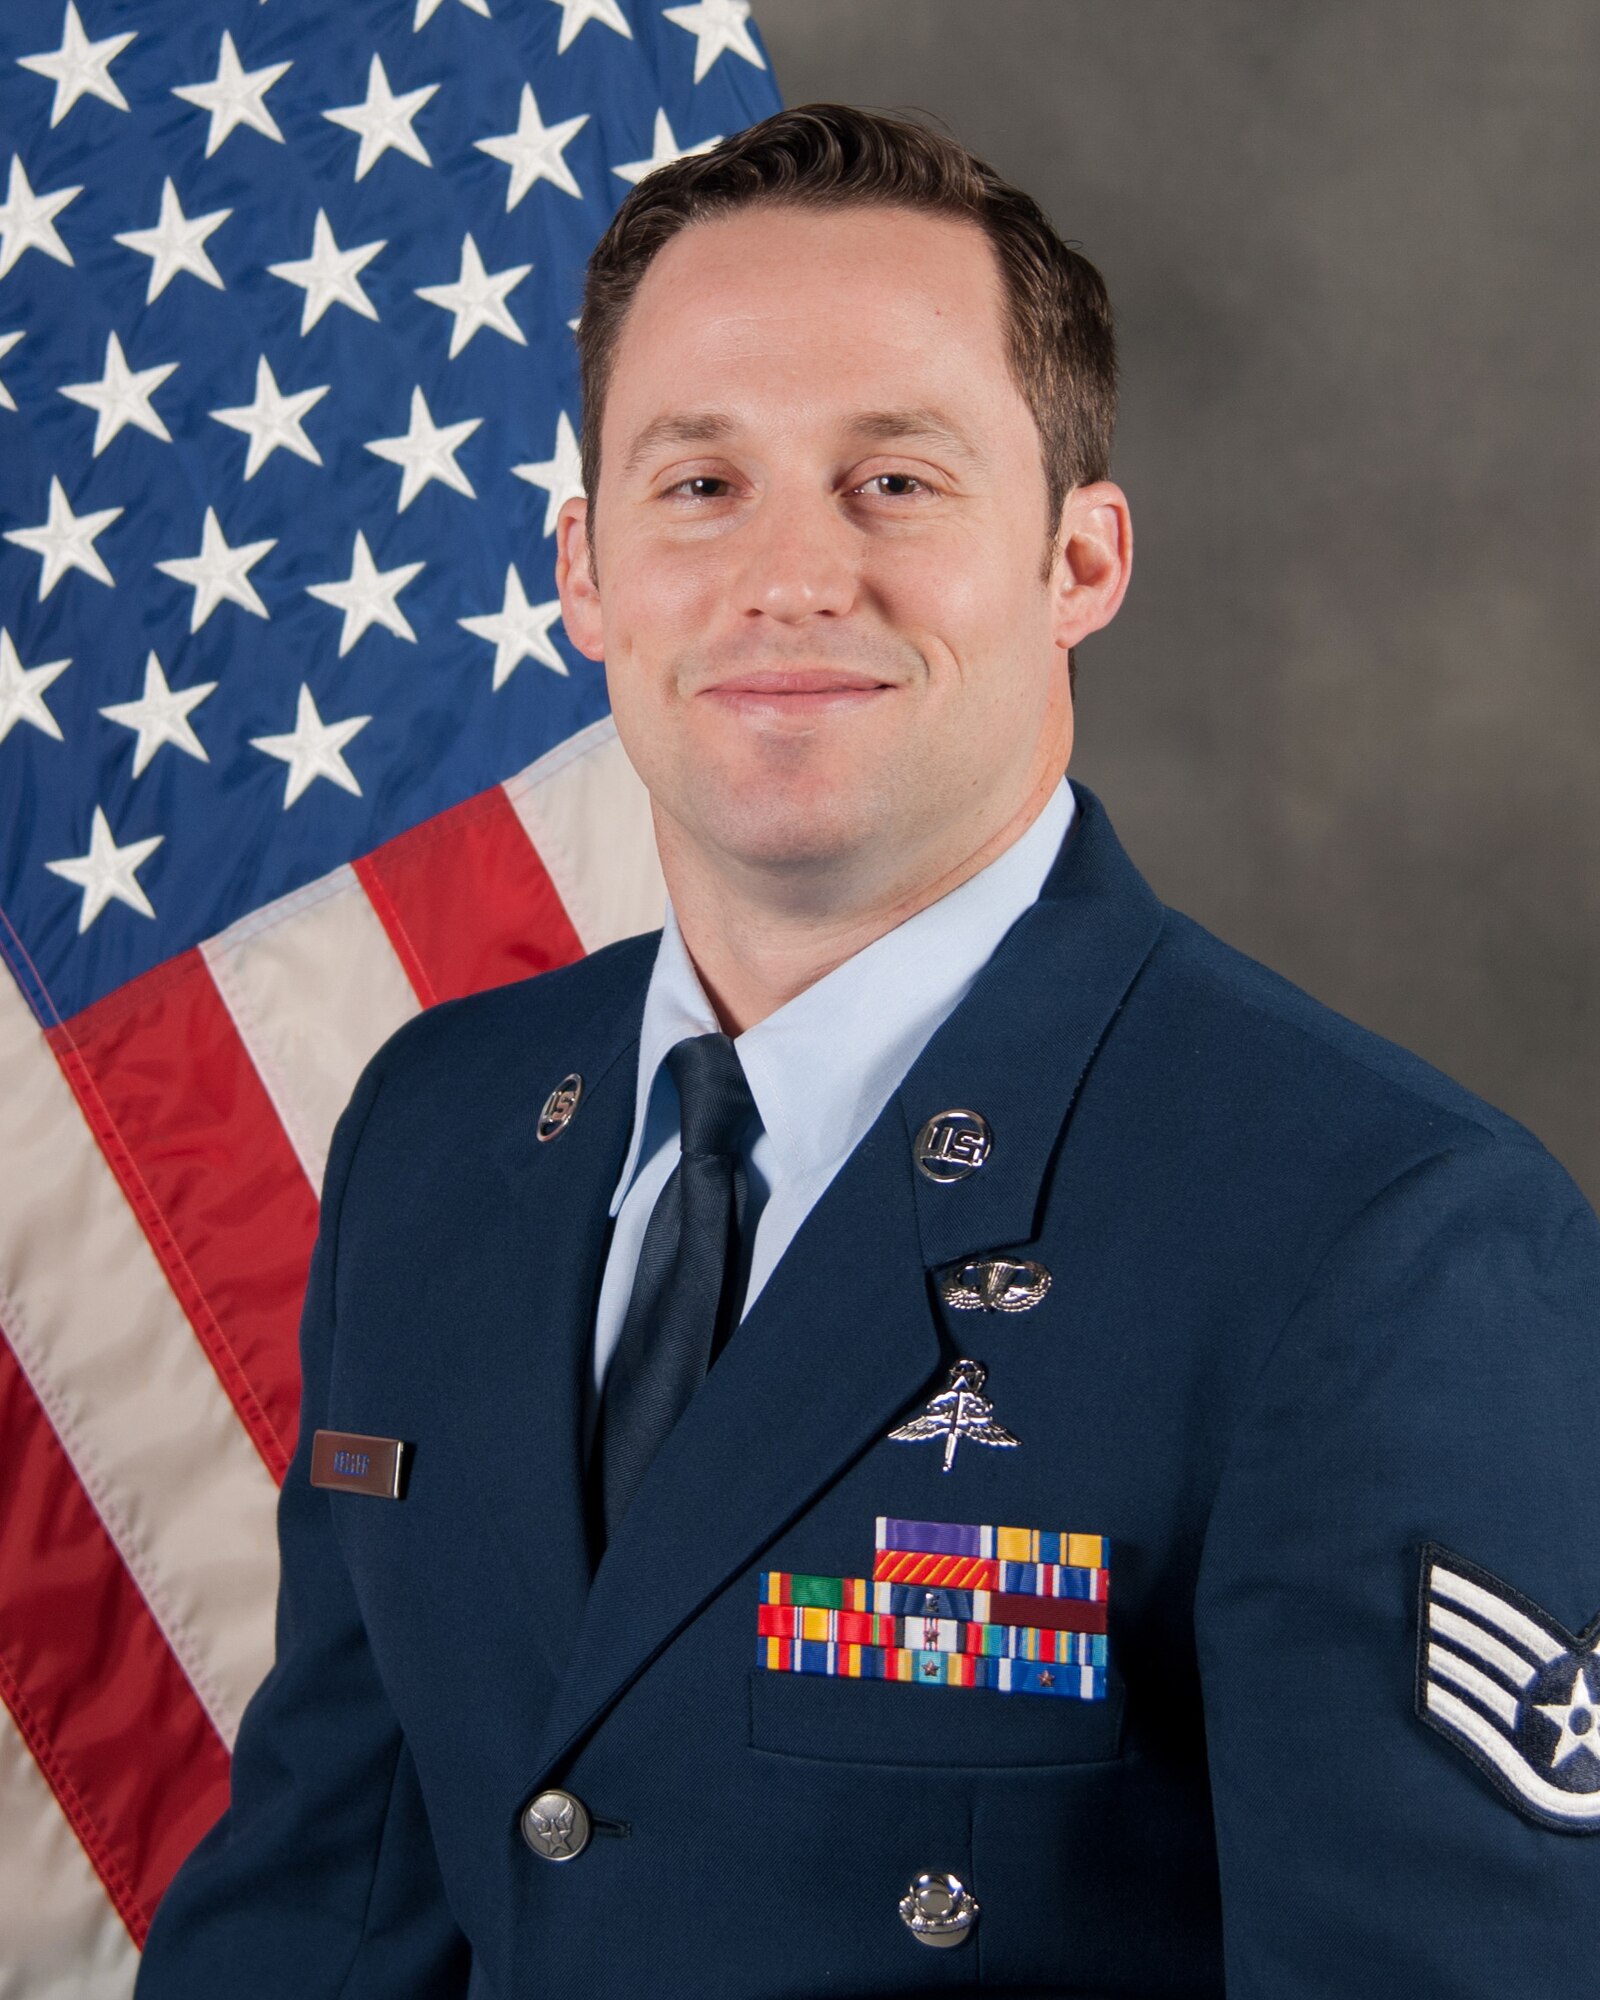 Staff Sgt. Daniel Keller of the 123rd Special Tactics Squadron has been selected as the Kentucky Air National Guard’s 2018 Non-Commissioned Officer of the Year.